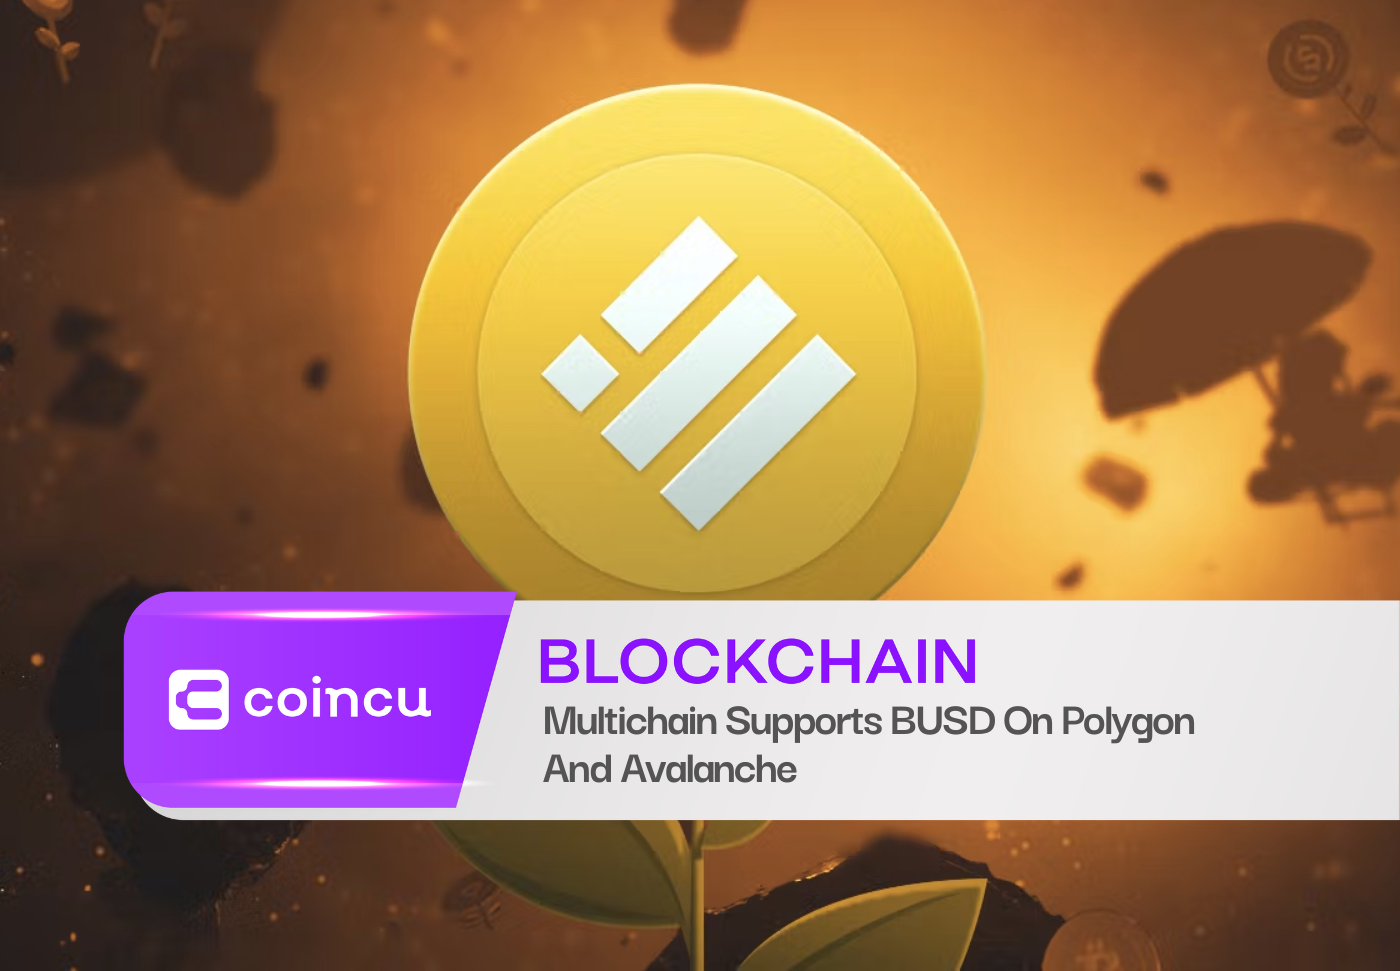 Multichain Supports BUSD On Polygon And Avalanche